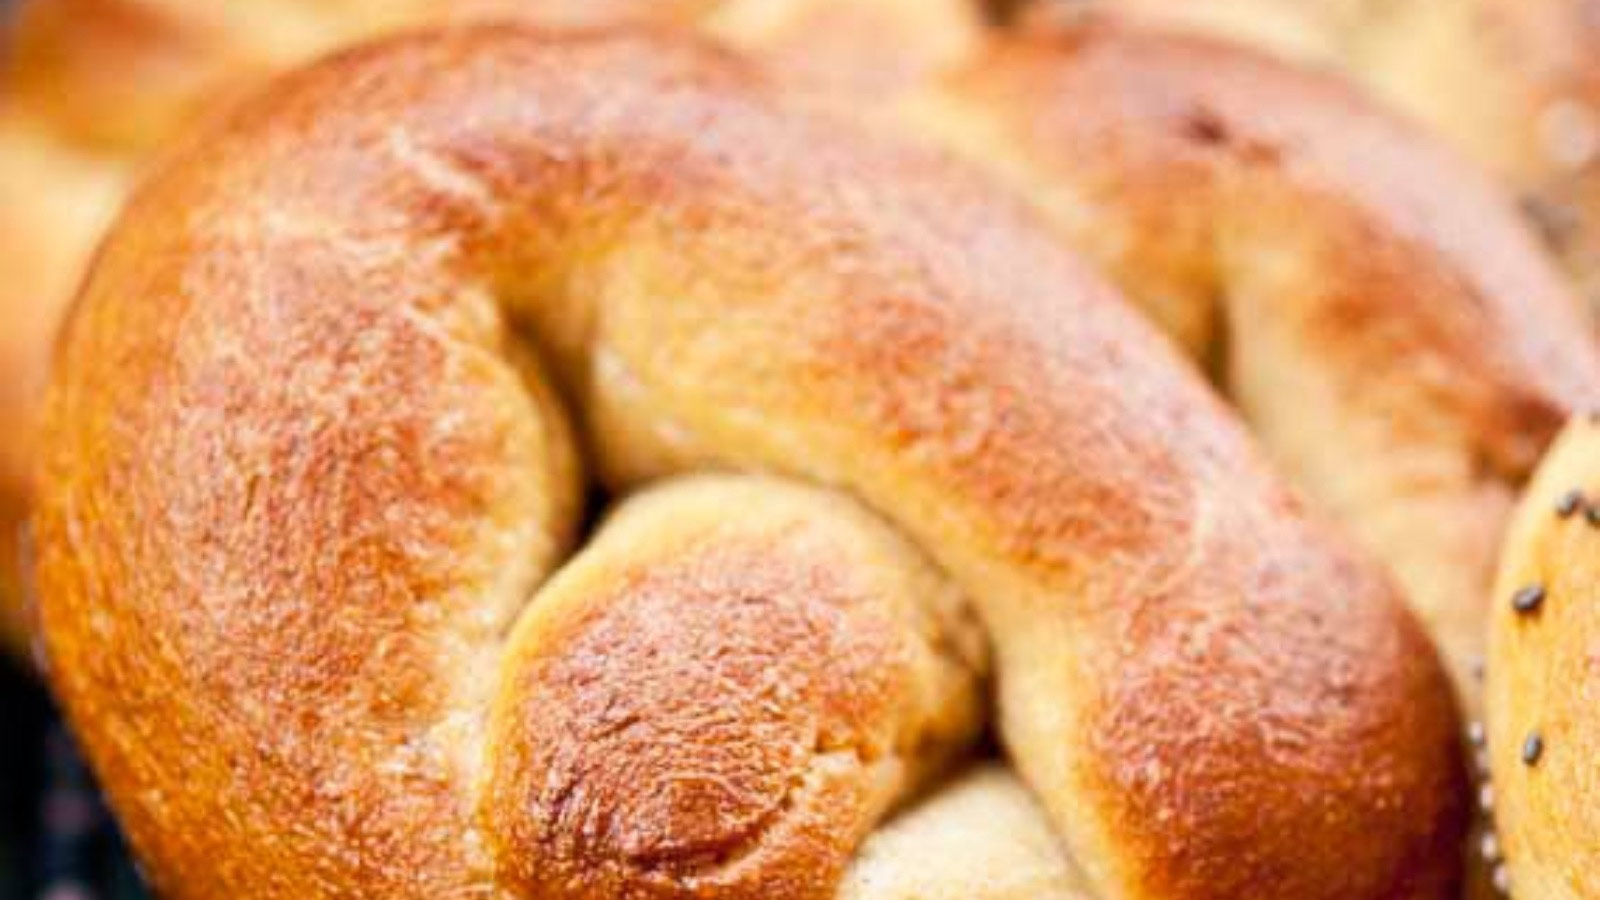 <p>These<a href="https://www.thegraciouspantry.com/clean-eating-soft-pretzels-2/"> soft pretzels</a> were made for snacking, and they are perfect for road trips because you don’t need to refrigerate them. You can dip them in your favorite sauces or dips or simply enjoy the yeasty goodness all on its own.  </p>